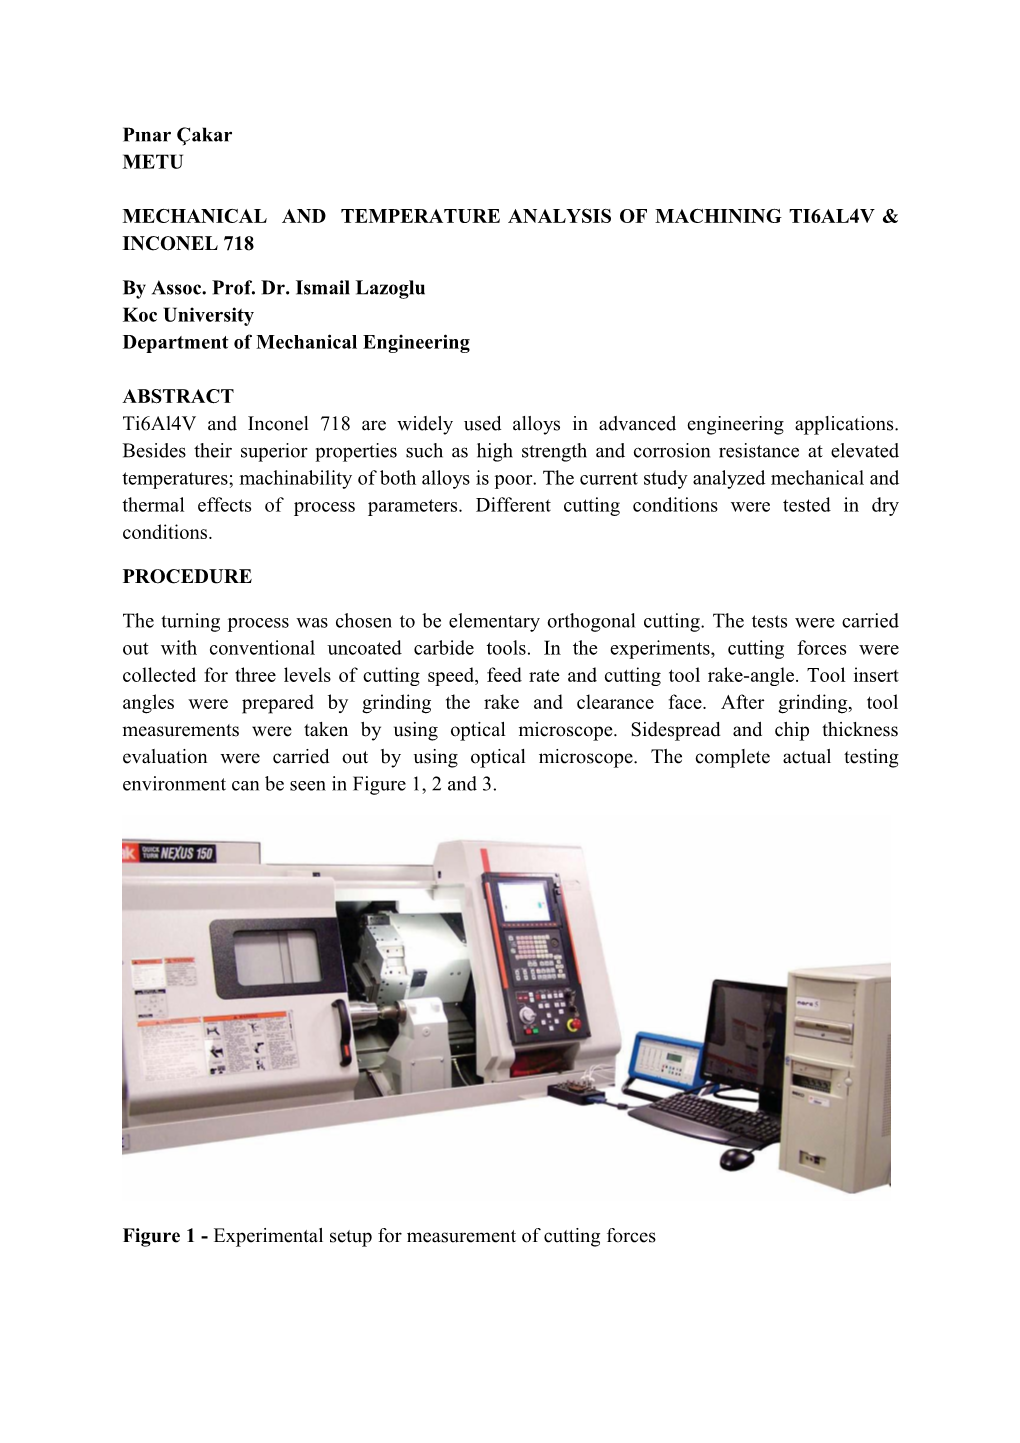 Mechanical and Temperature Analysis of Machining Ti6al4v & Inconel 718